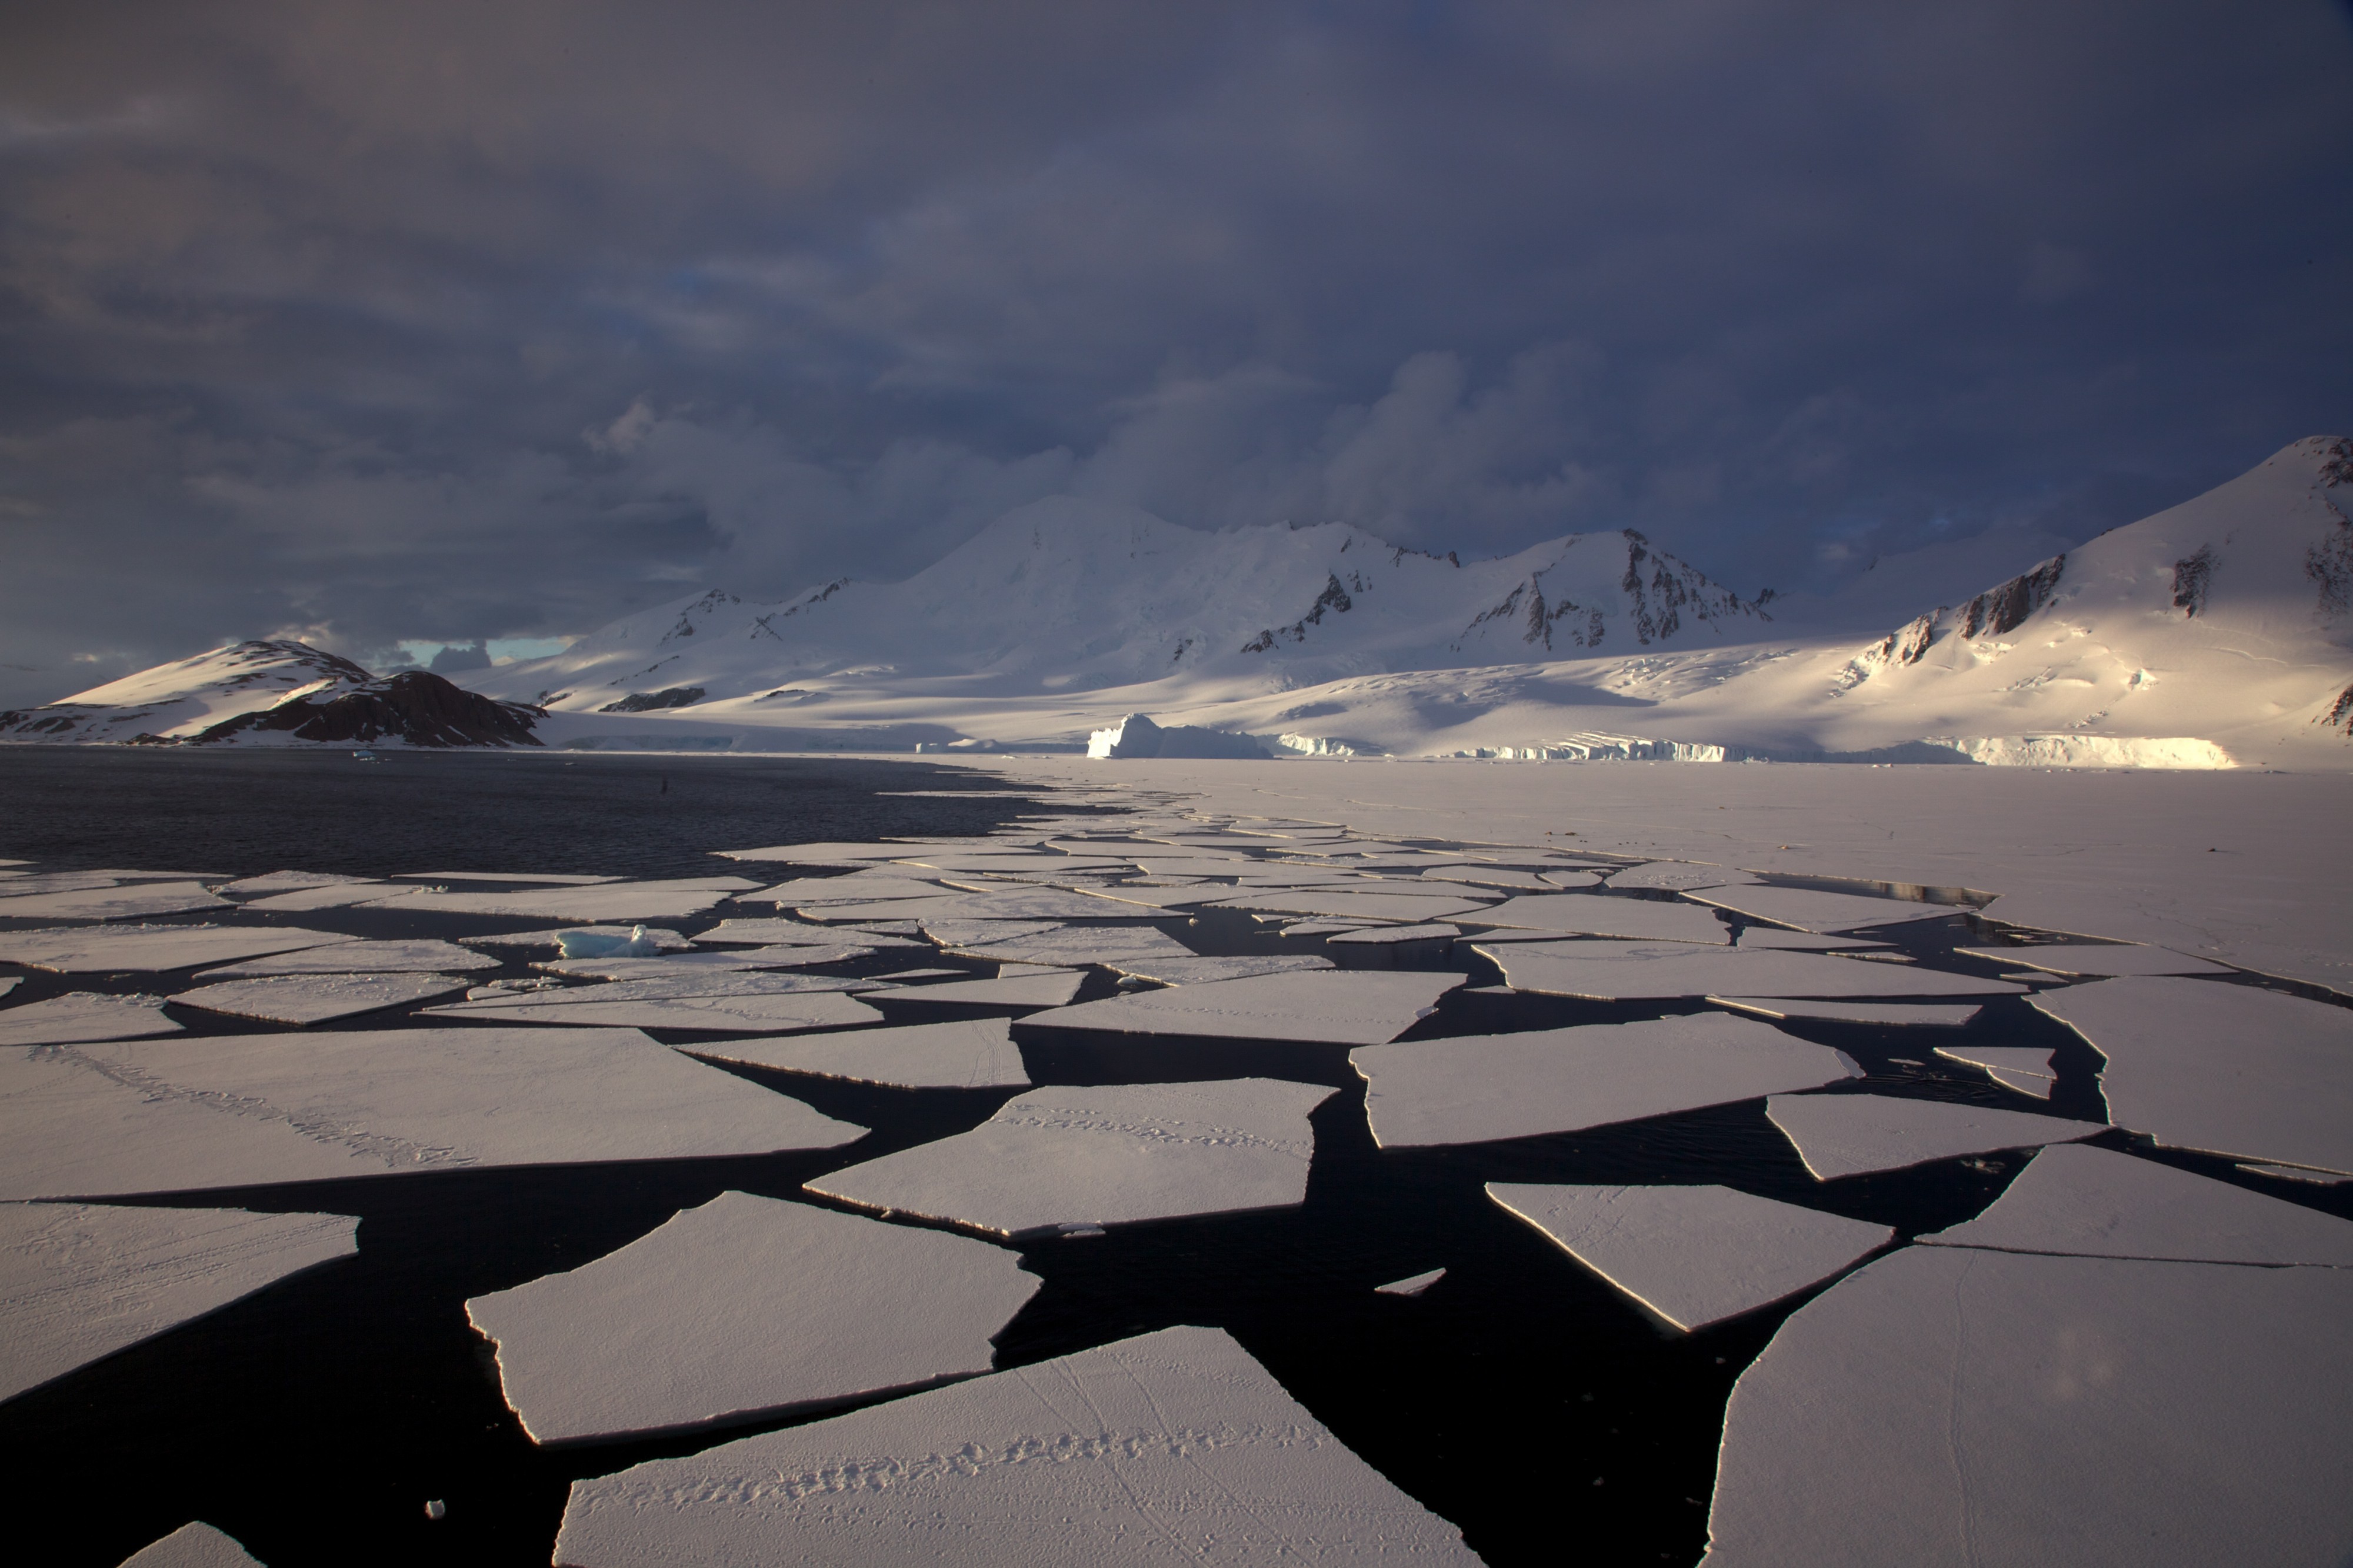 Antarctic mountains, pack ice and ice floes